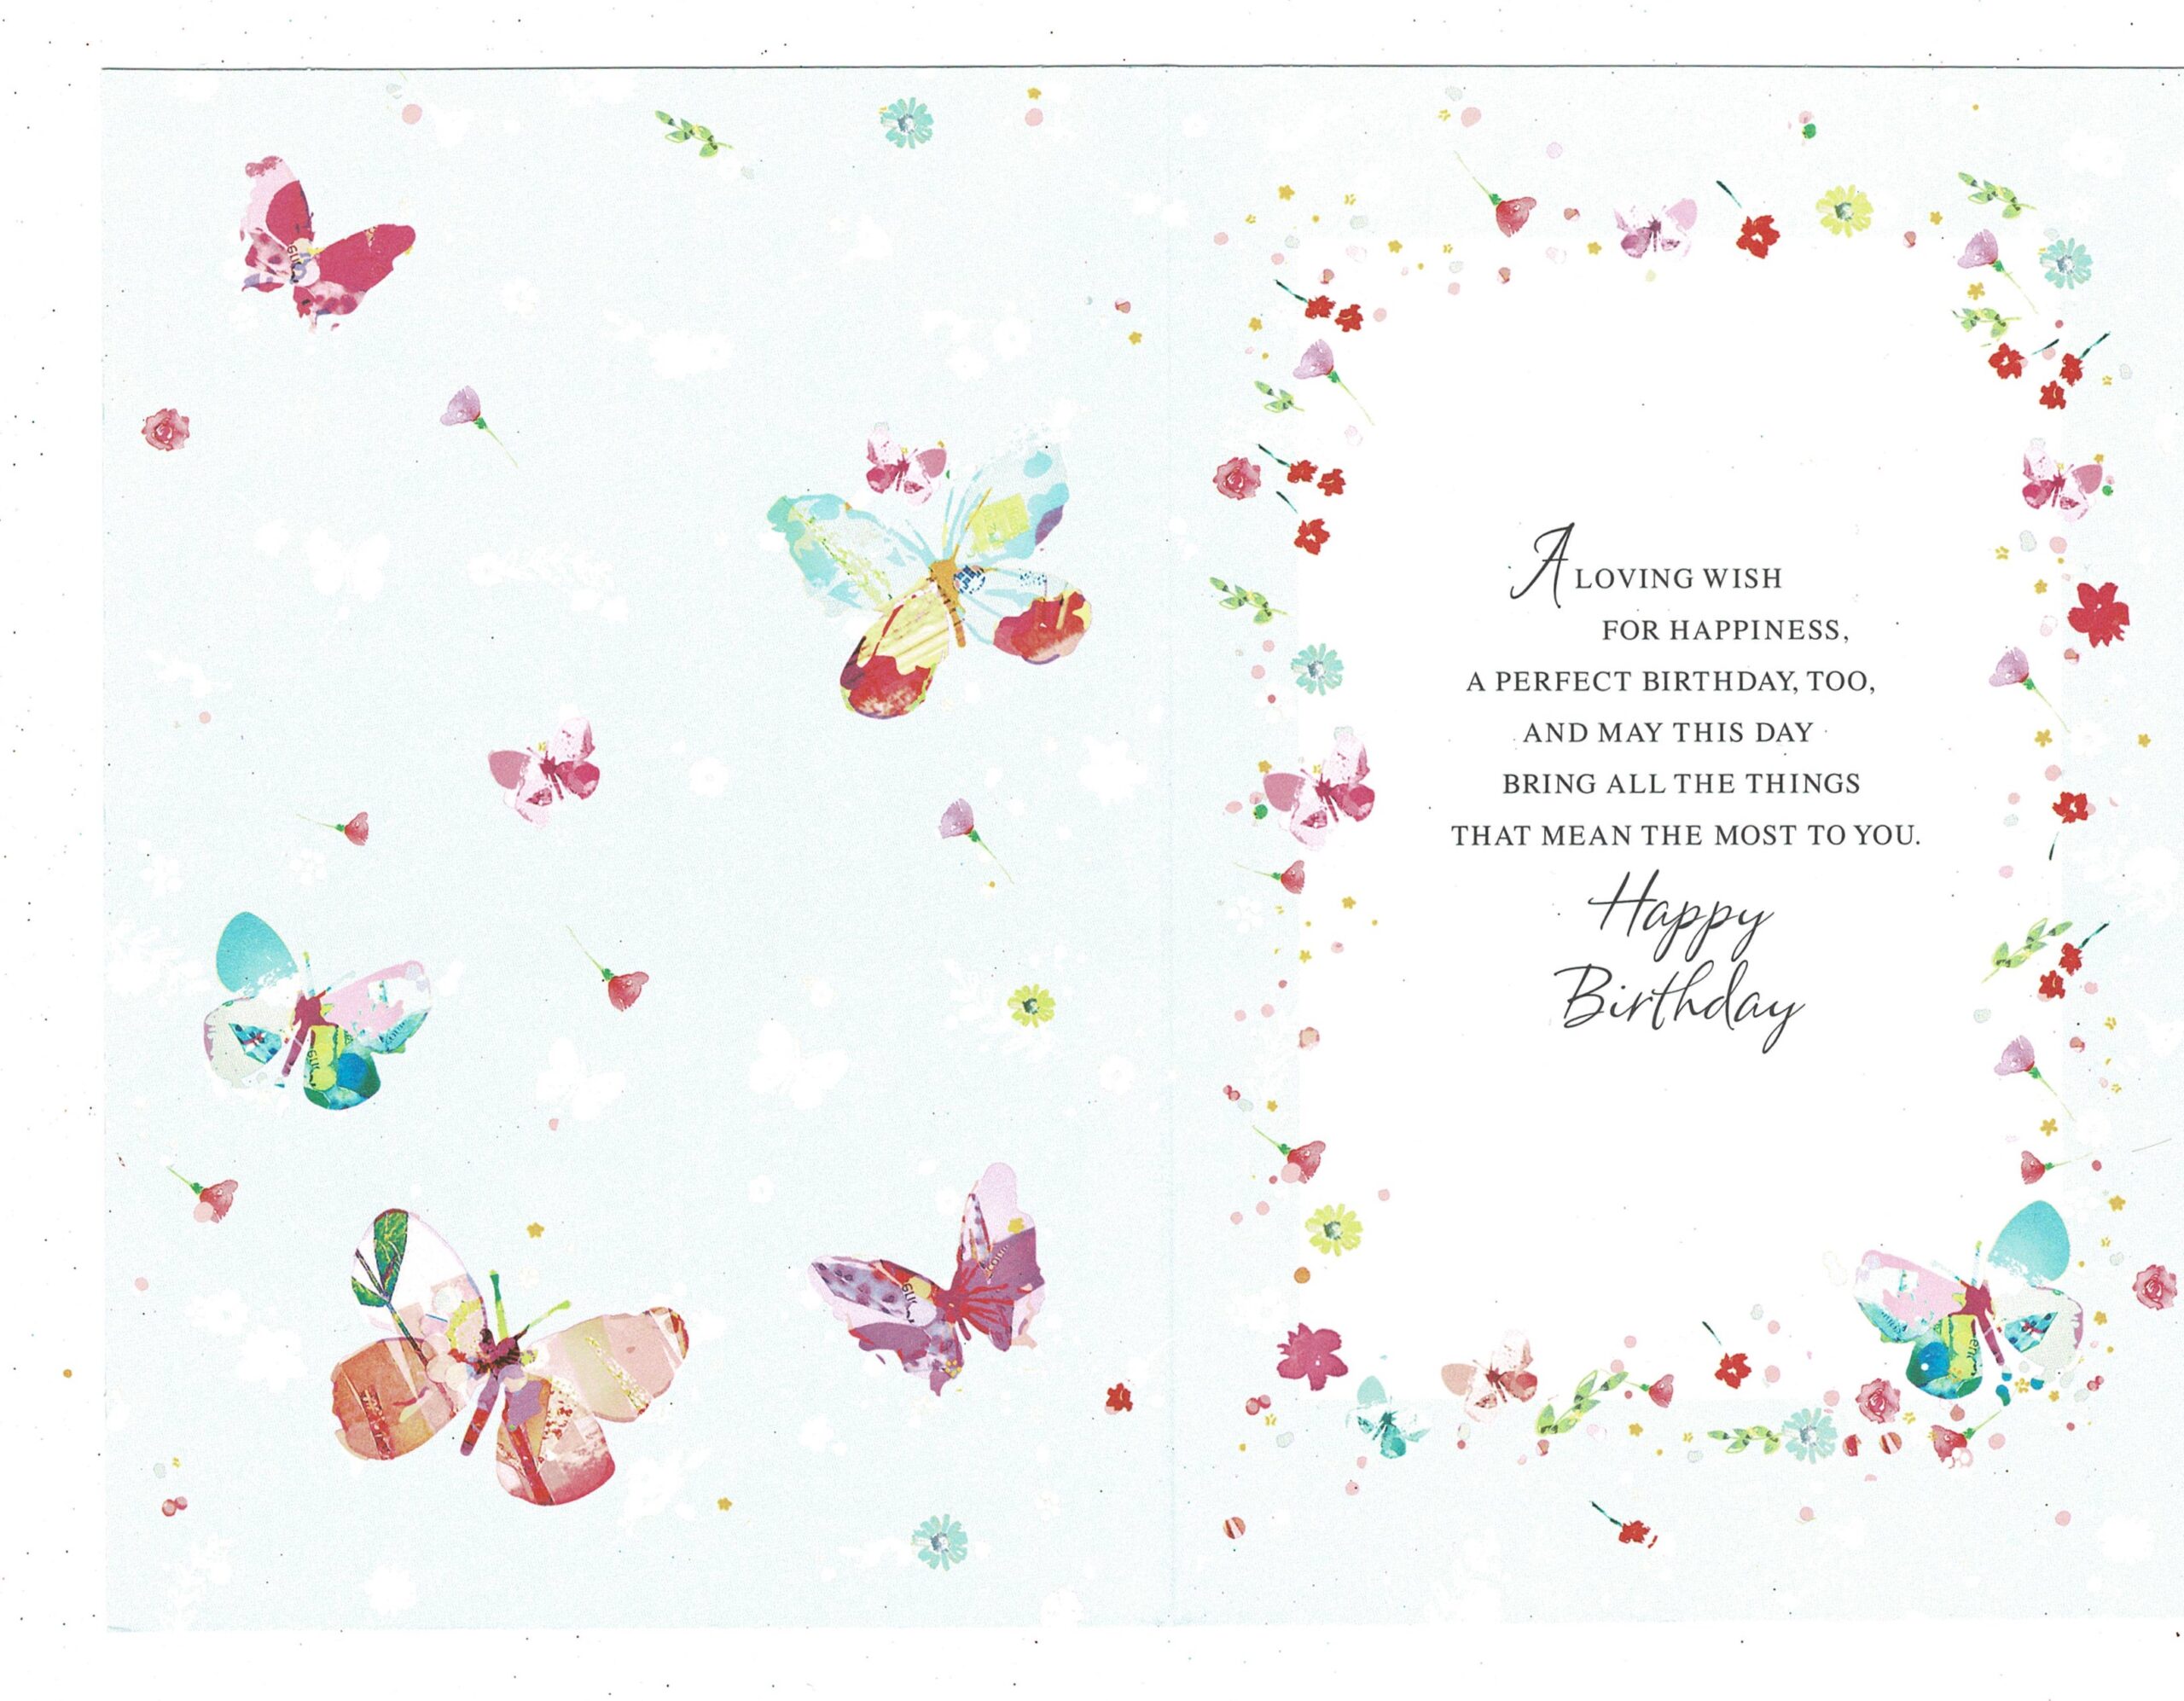 Granddaughter Birthday Card With Butterfly And Sentiment Verse Design ...